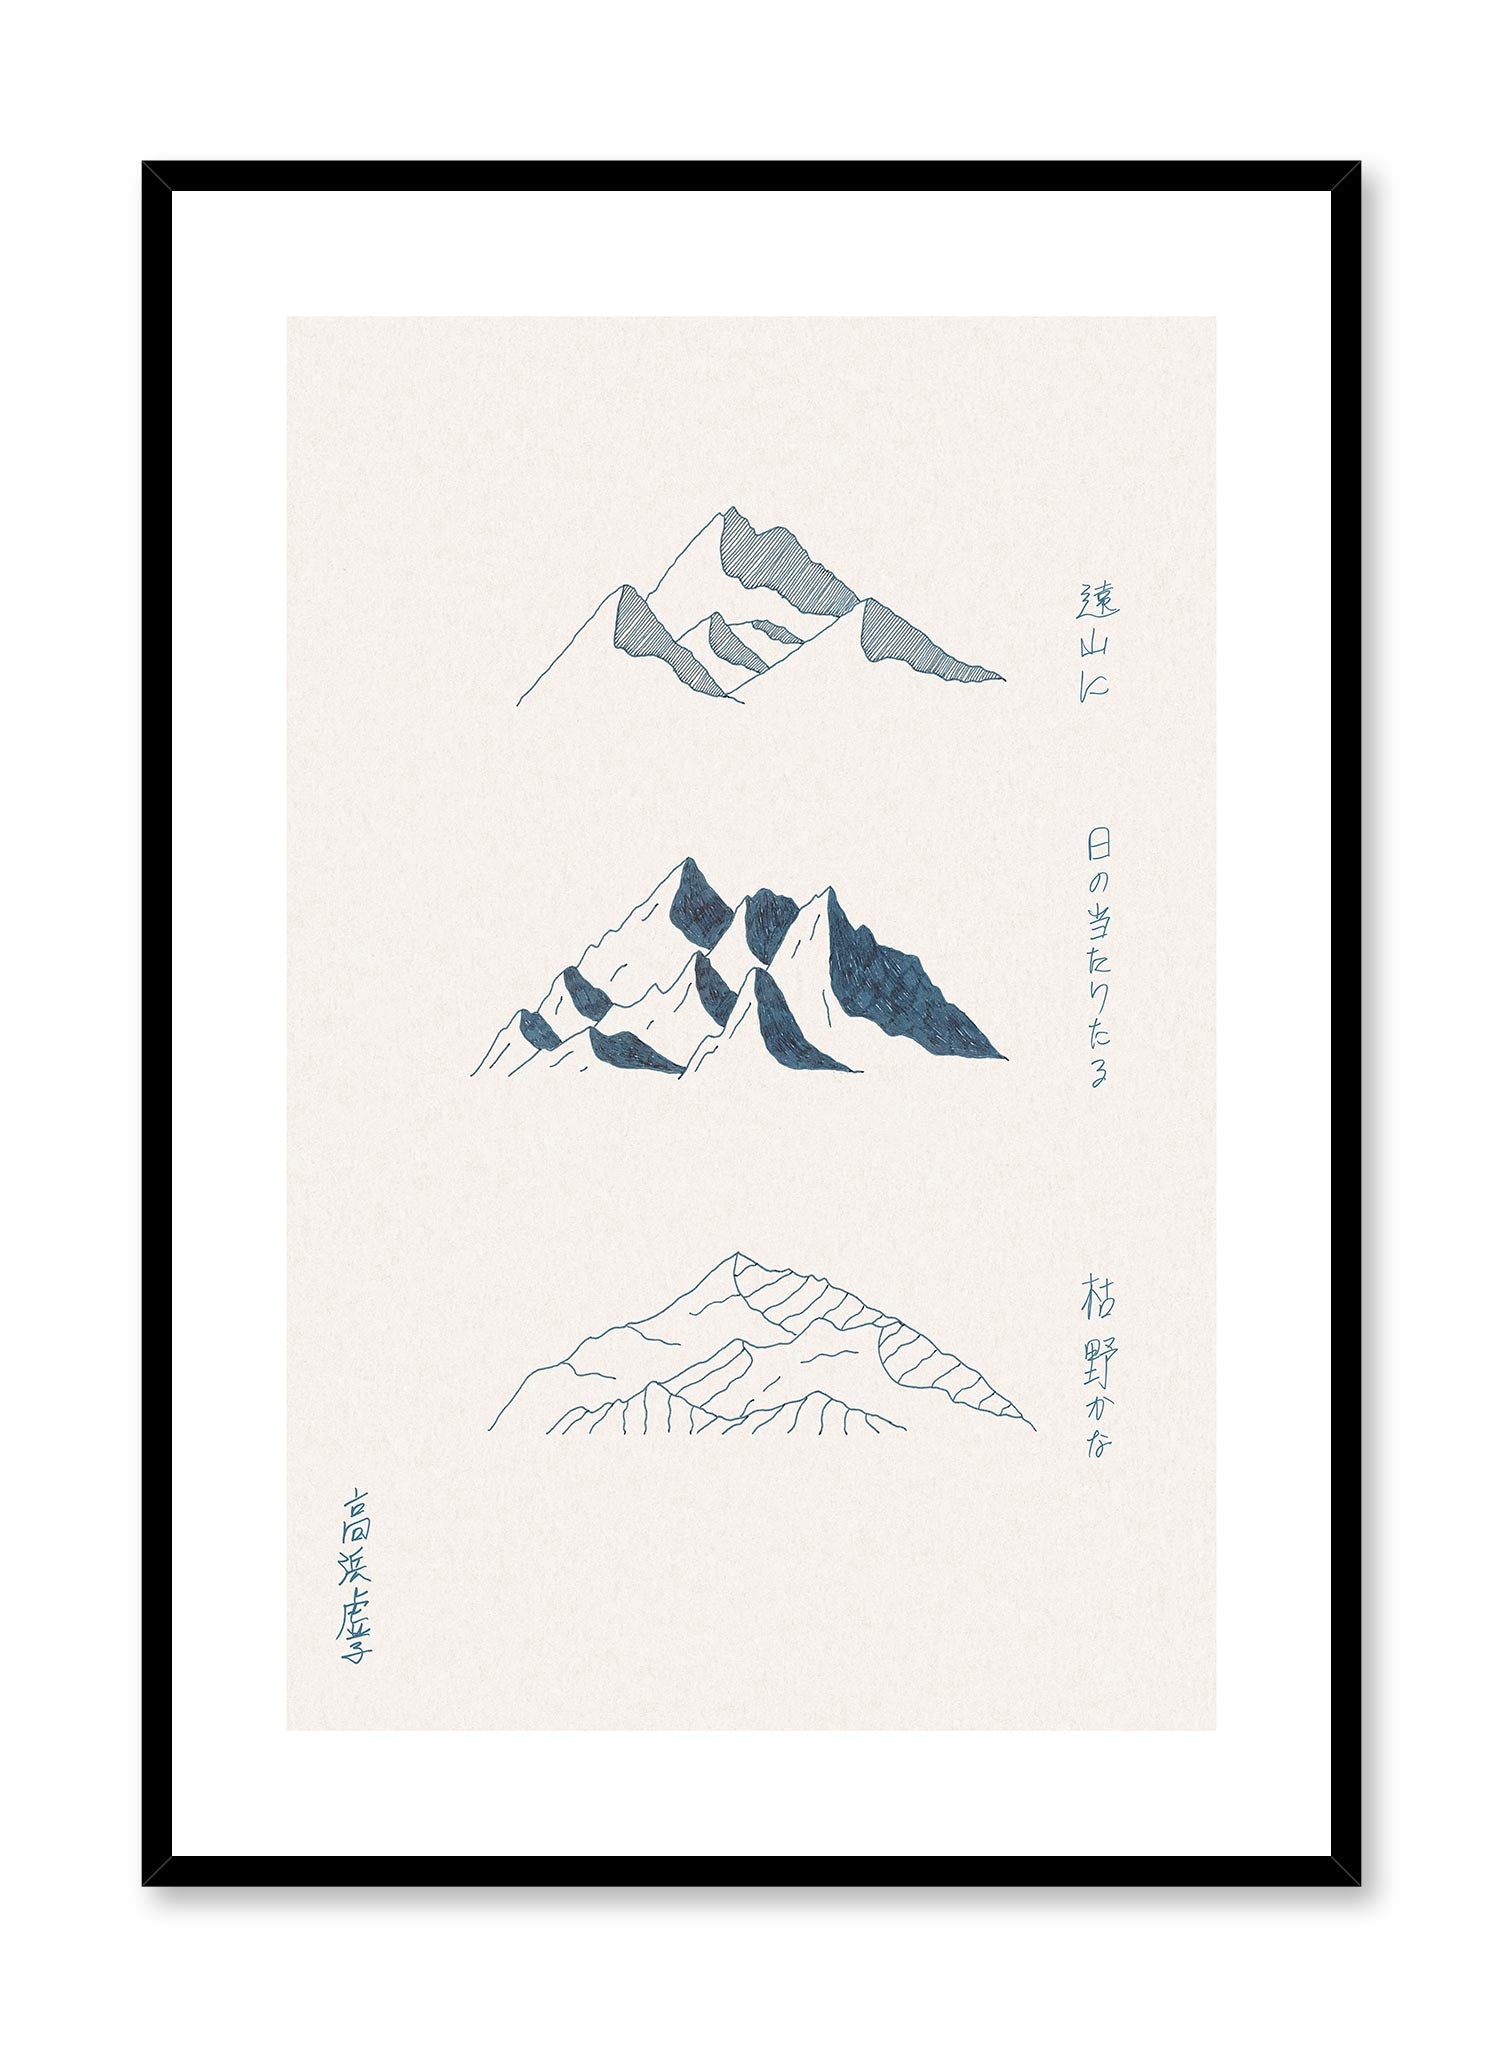 Fuji is a minimalist illustration by Opposite Wall of three types of mountains drawn by hand.